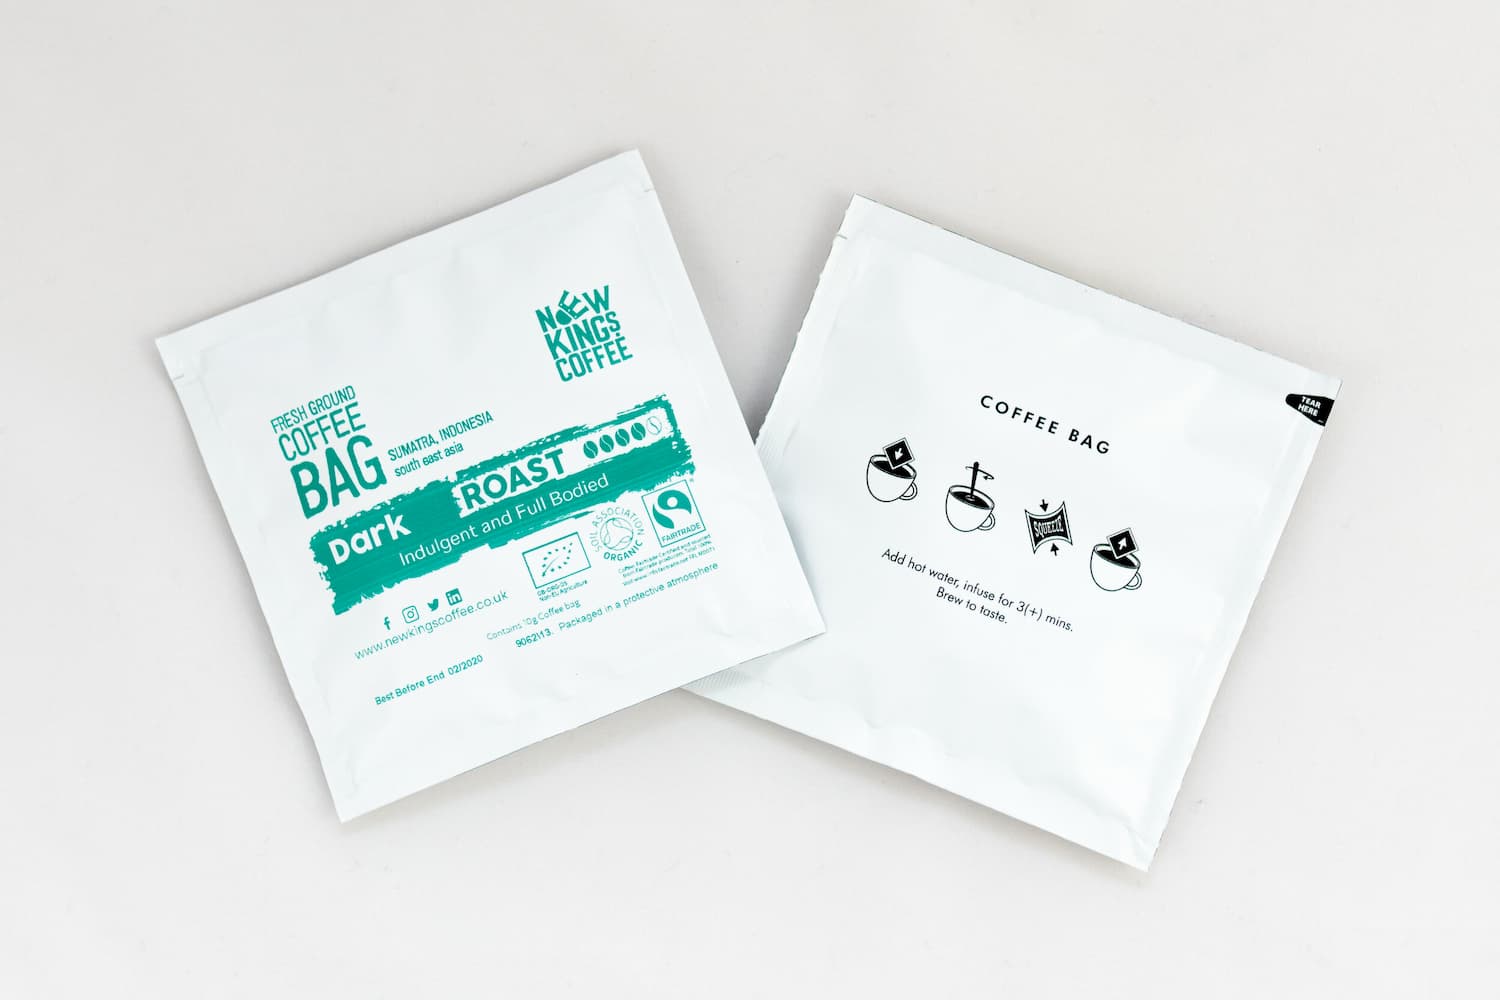 THE MISSING LINK: ECO-FRIENDLY PRACTICES AND OUR FOIL SACHET